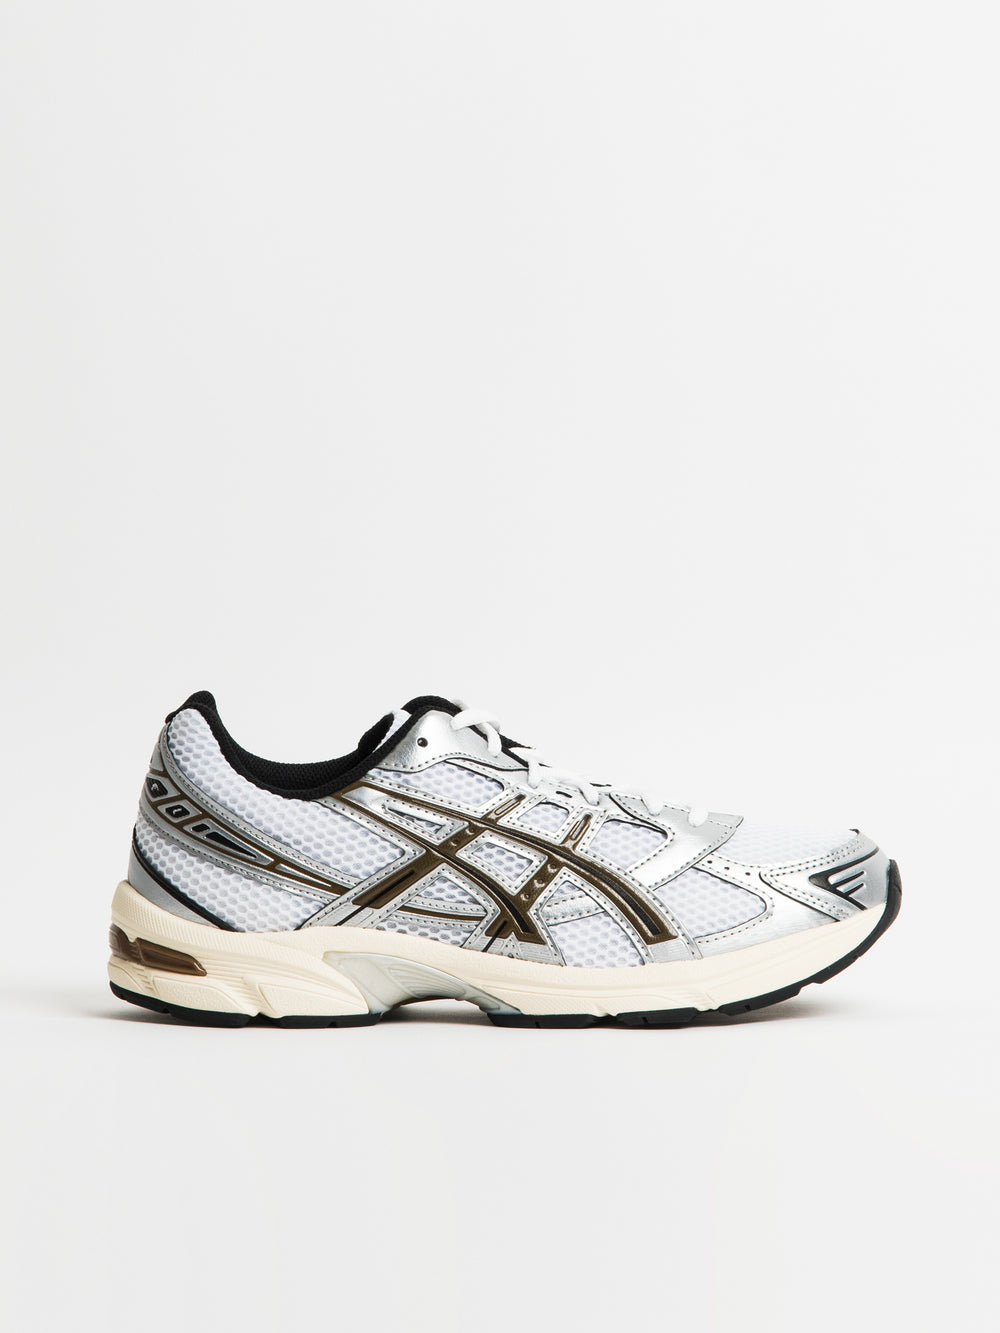 MENS ASICS GEL 1130 SNEAKERS  Boathouse Footwear Collective